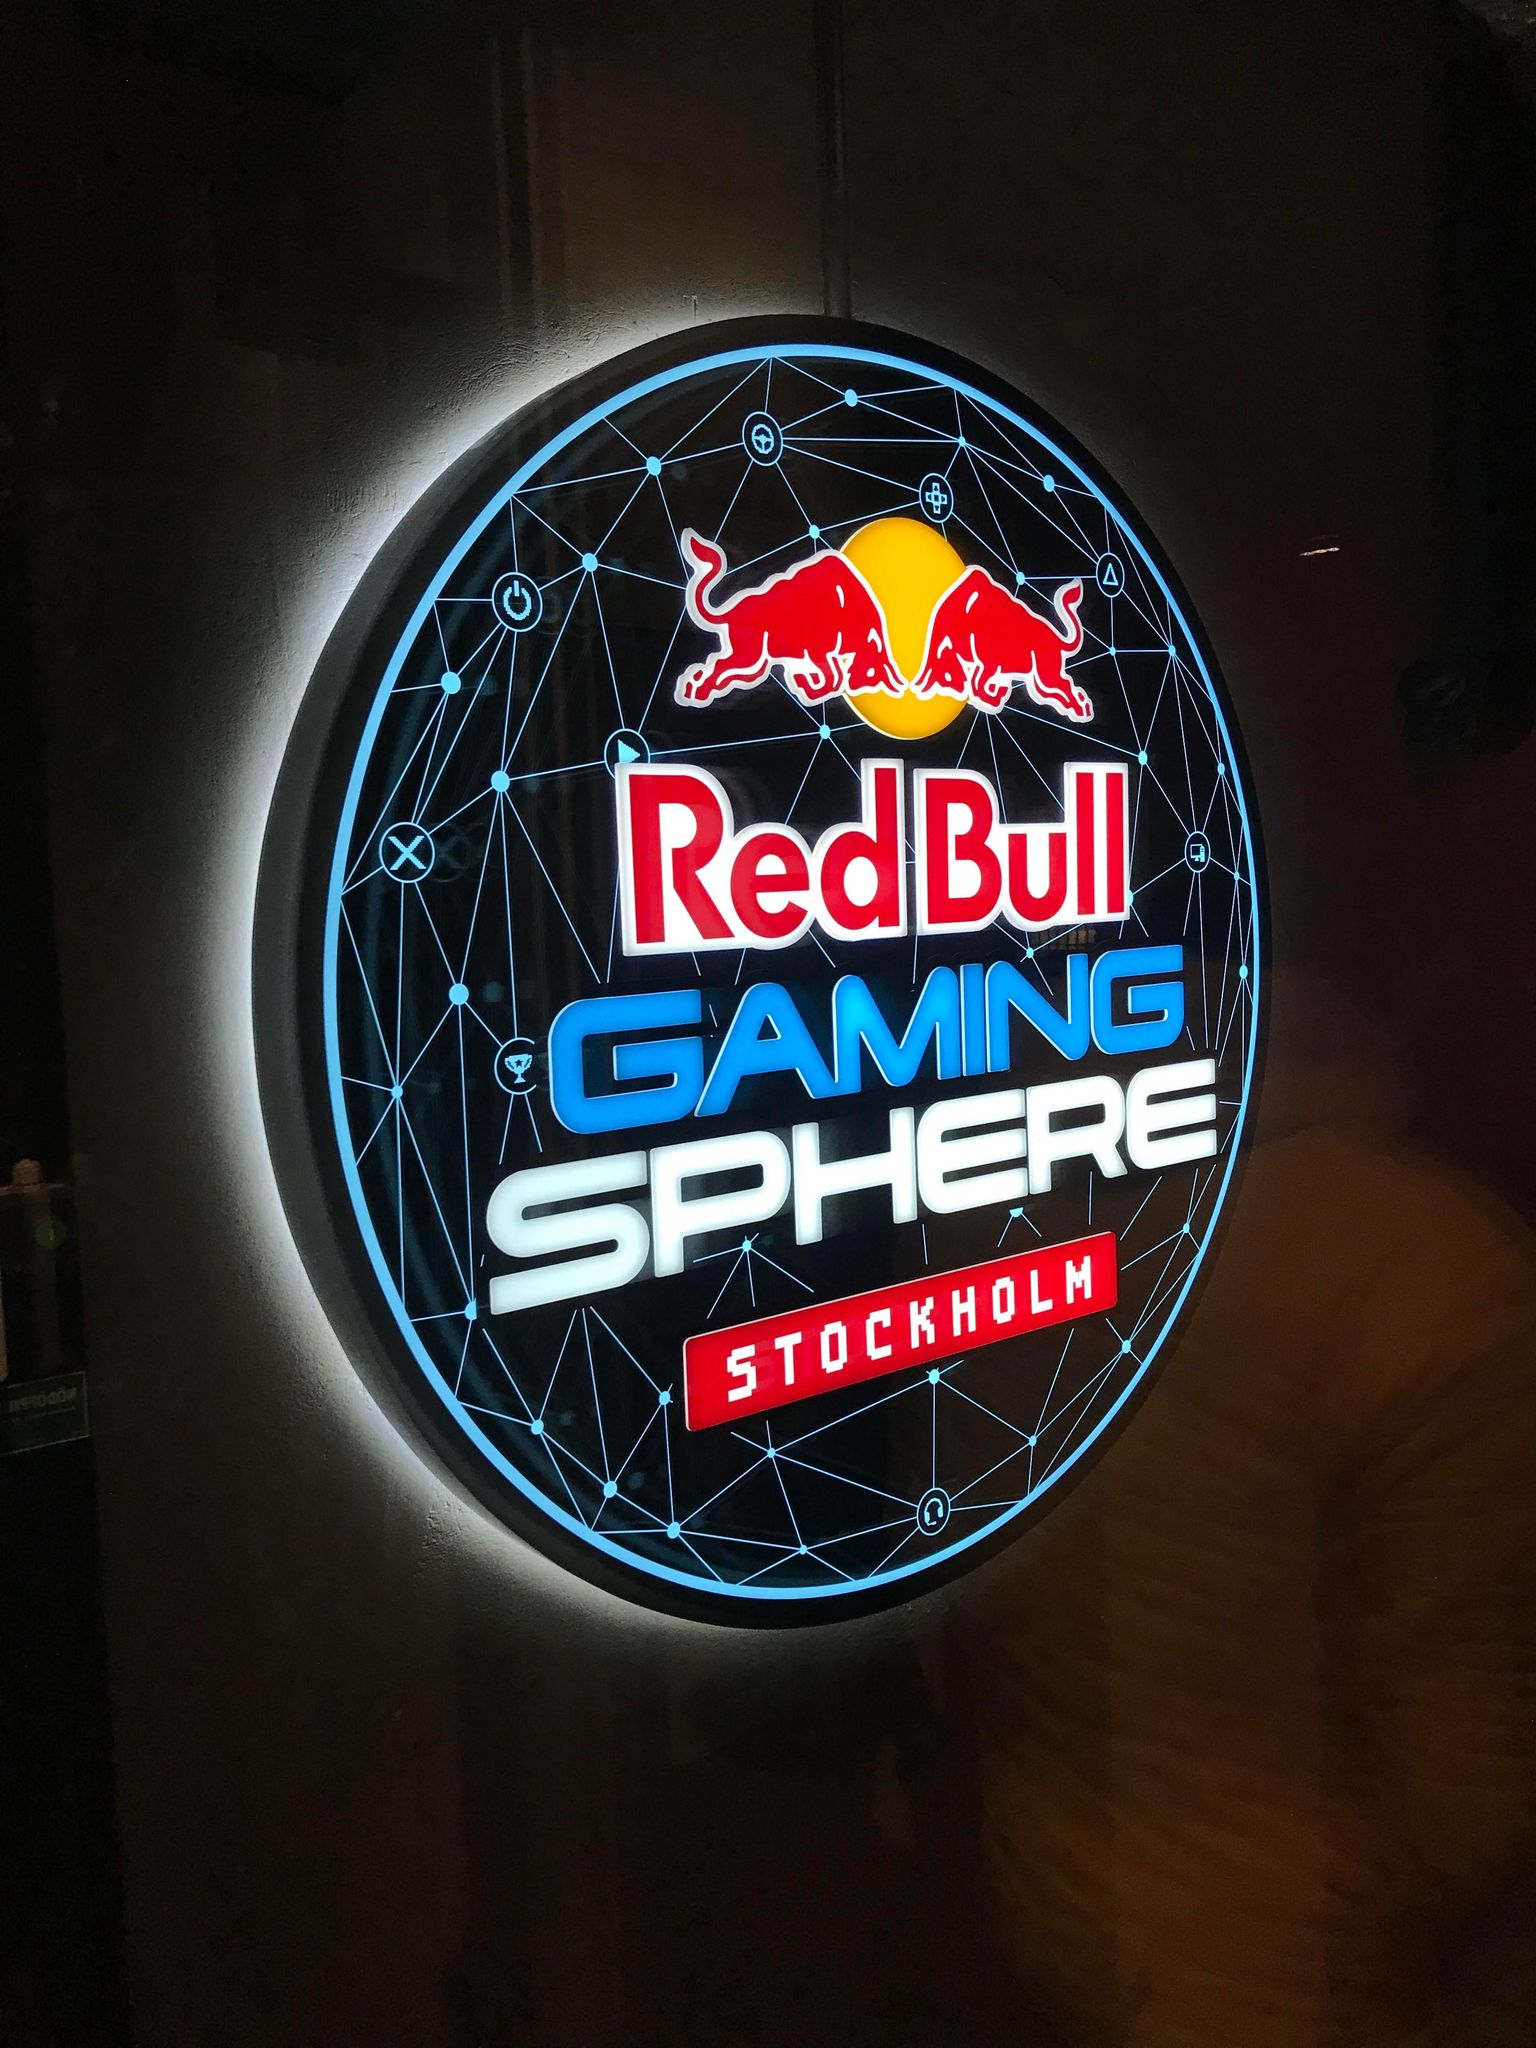 Across The North on Twitter: "We would like to give a huge thank you to Red Bull for letting us use at Bull Gaming Sphere in Their crew